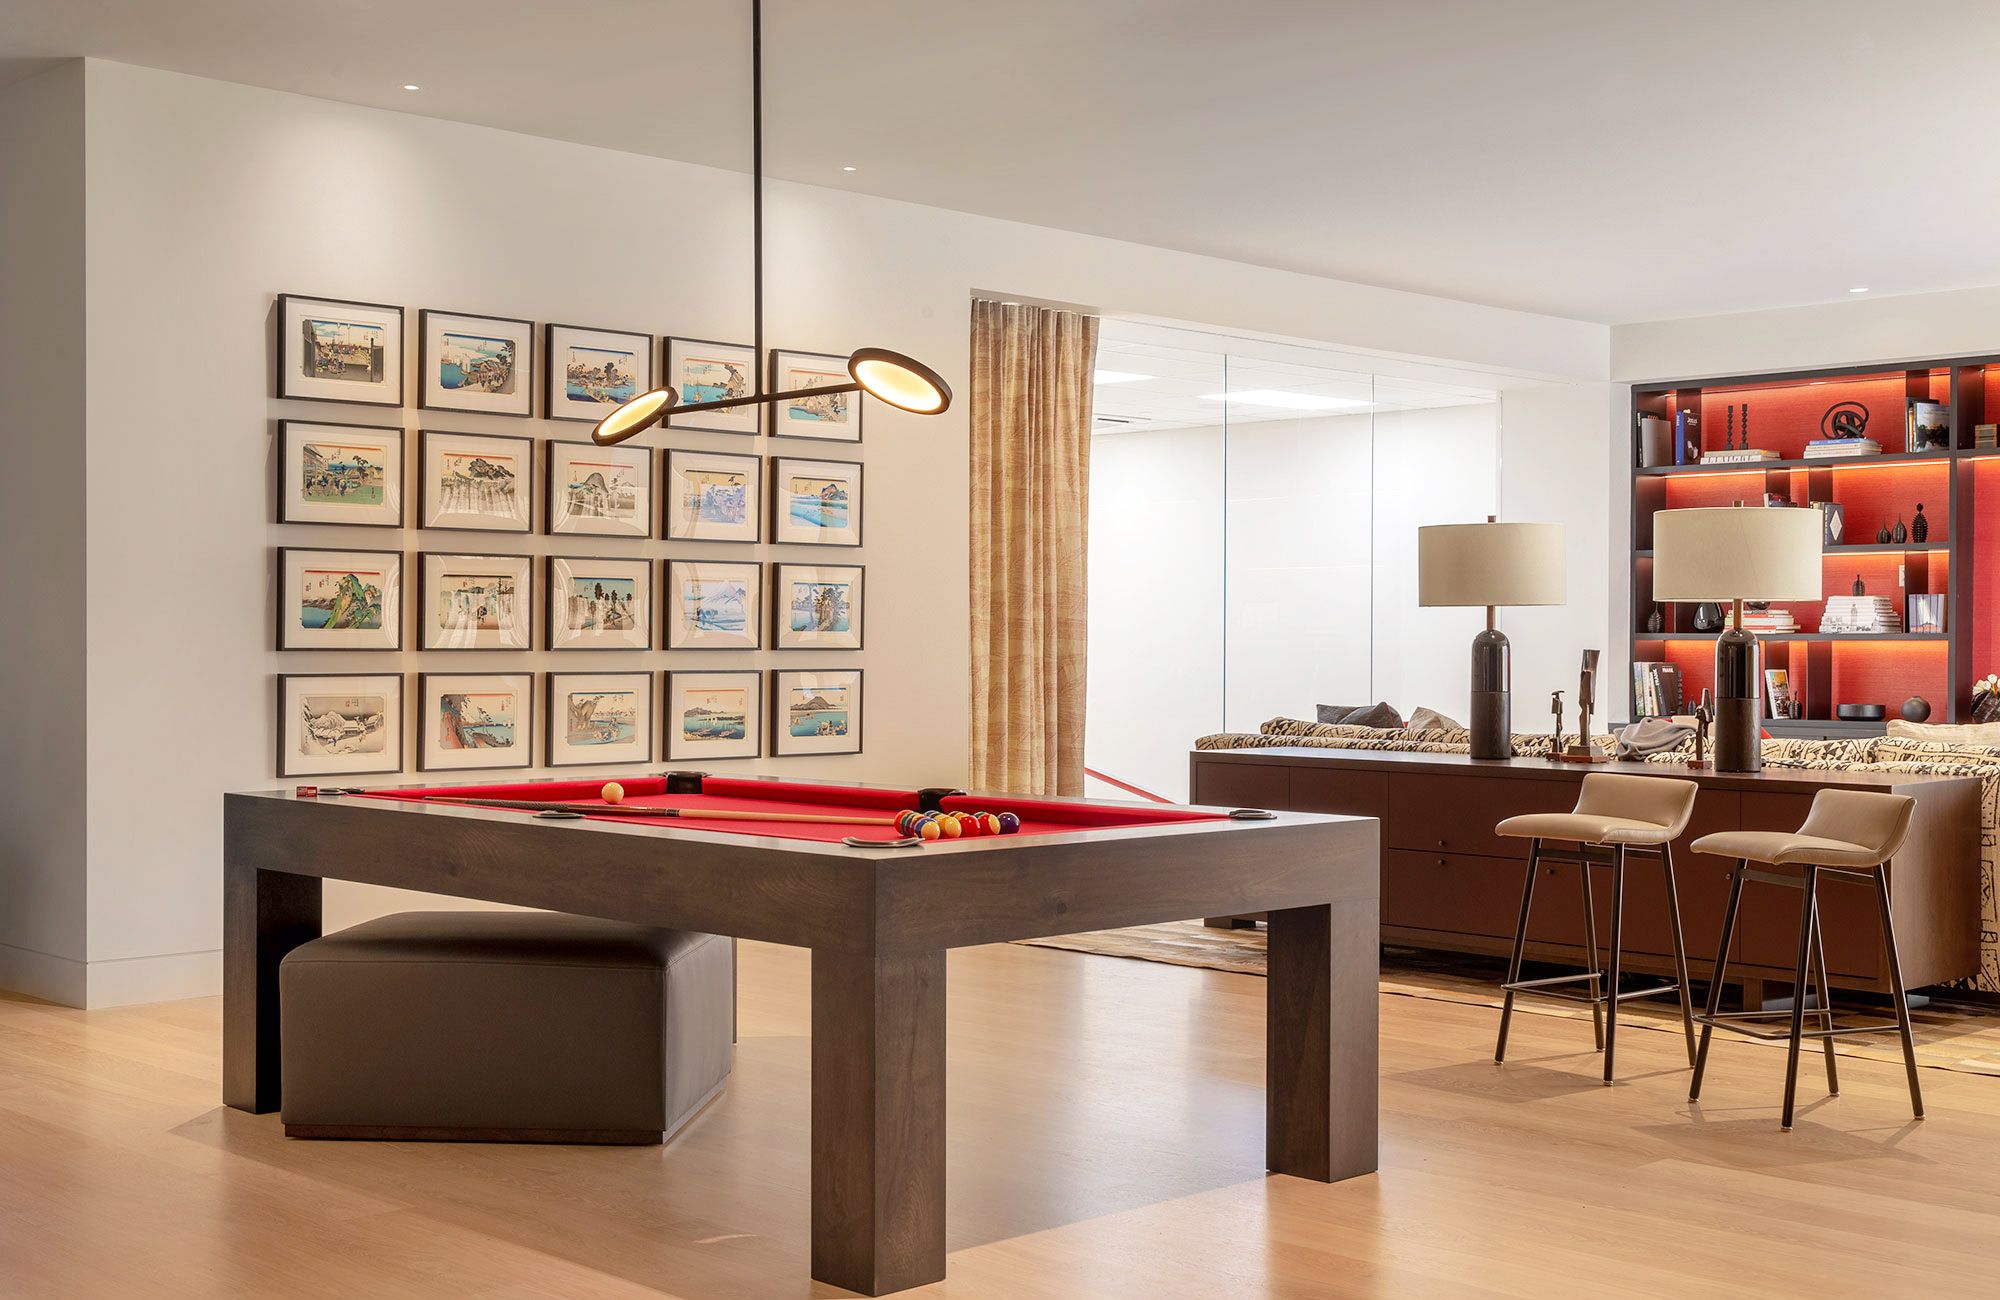 30 Epic Game Room Ideas How To Design A Home Entertainment Space